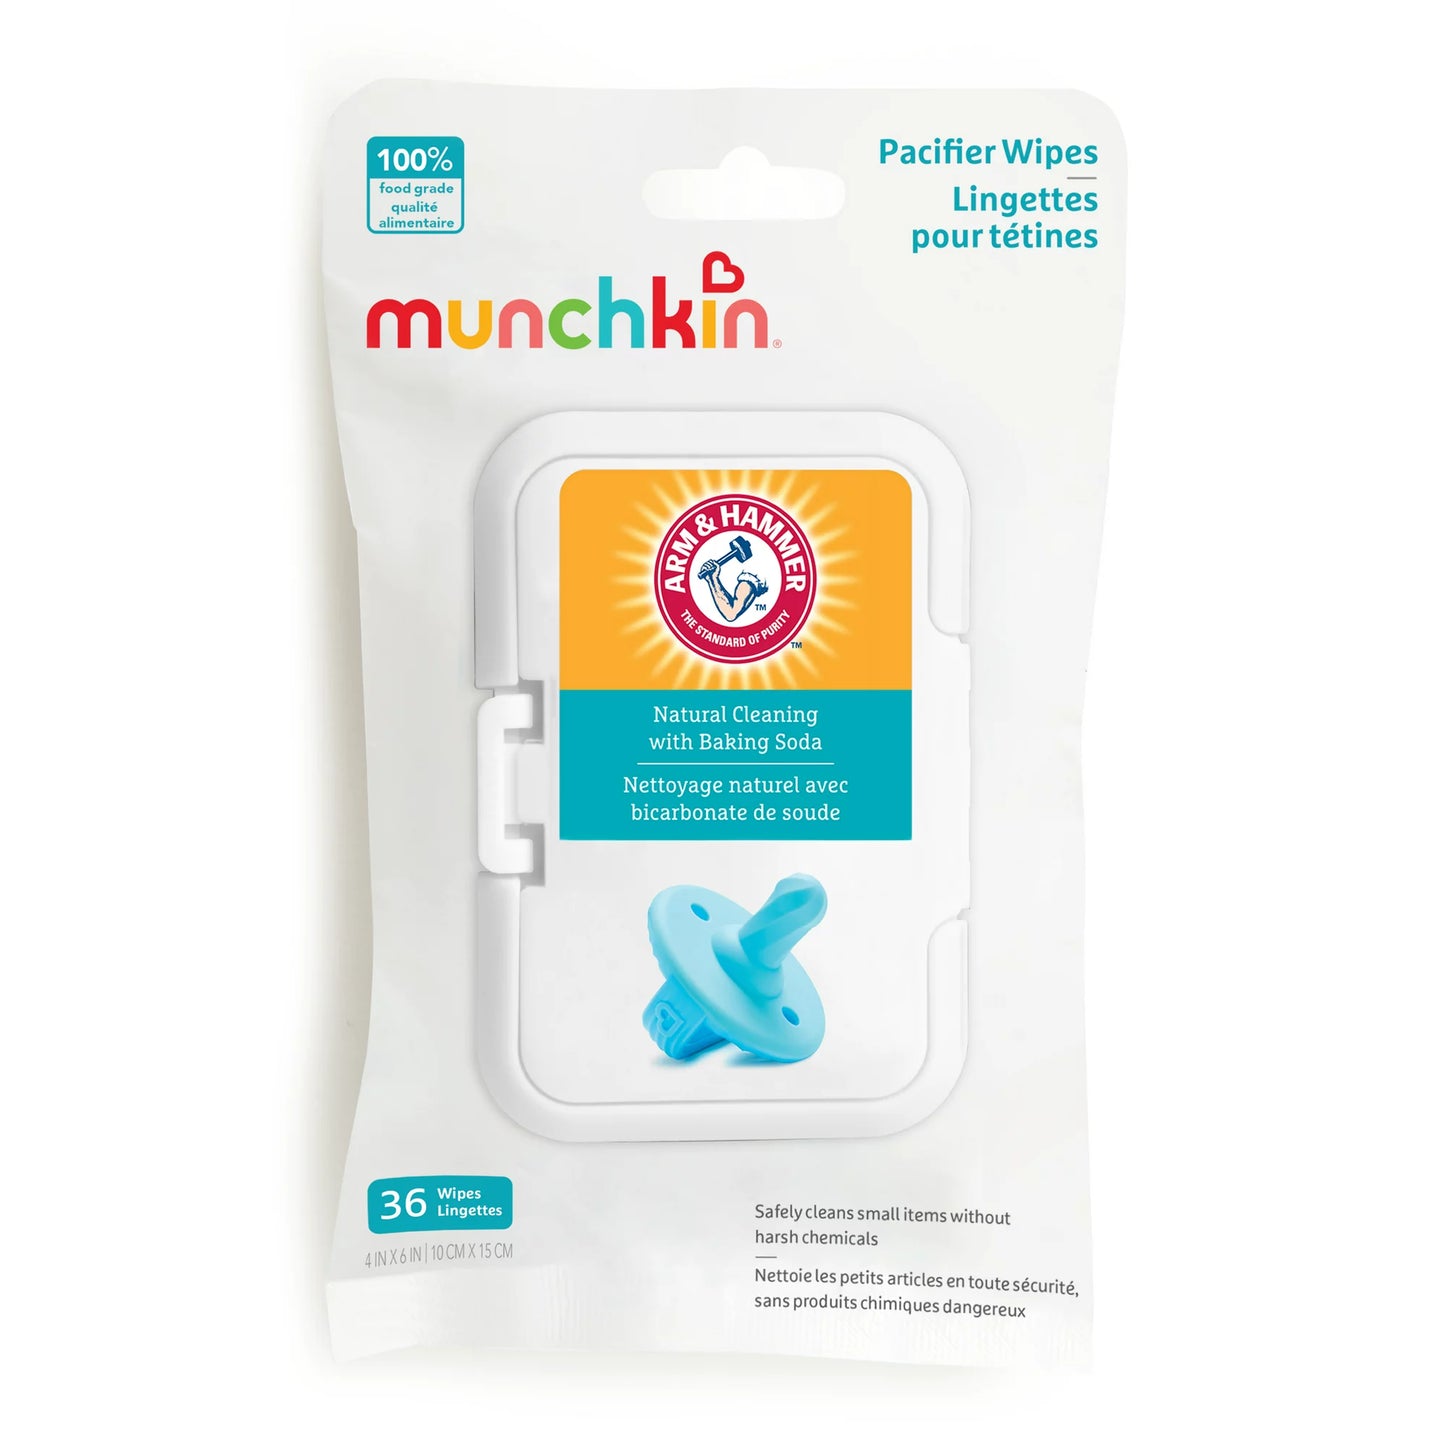 Munchkin Arm & Hammer™ Pacifier, 36 Wipes, 1 Pack